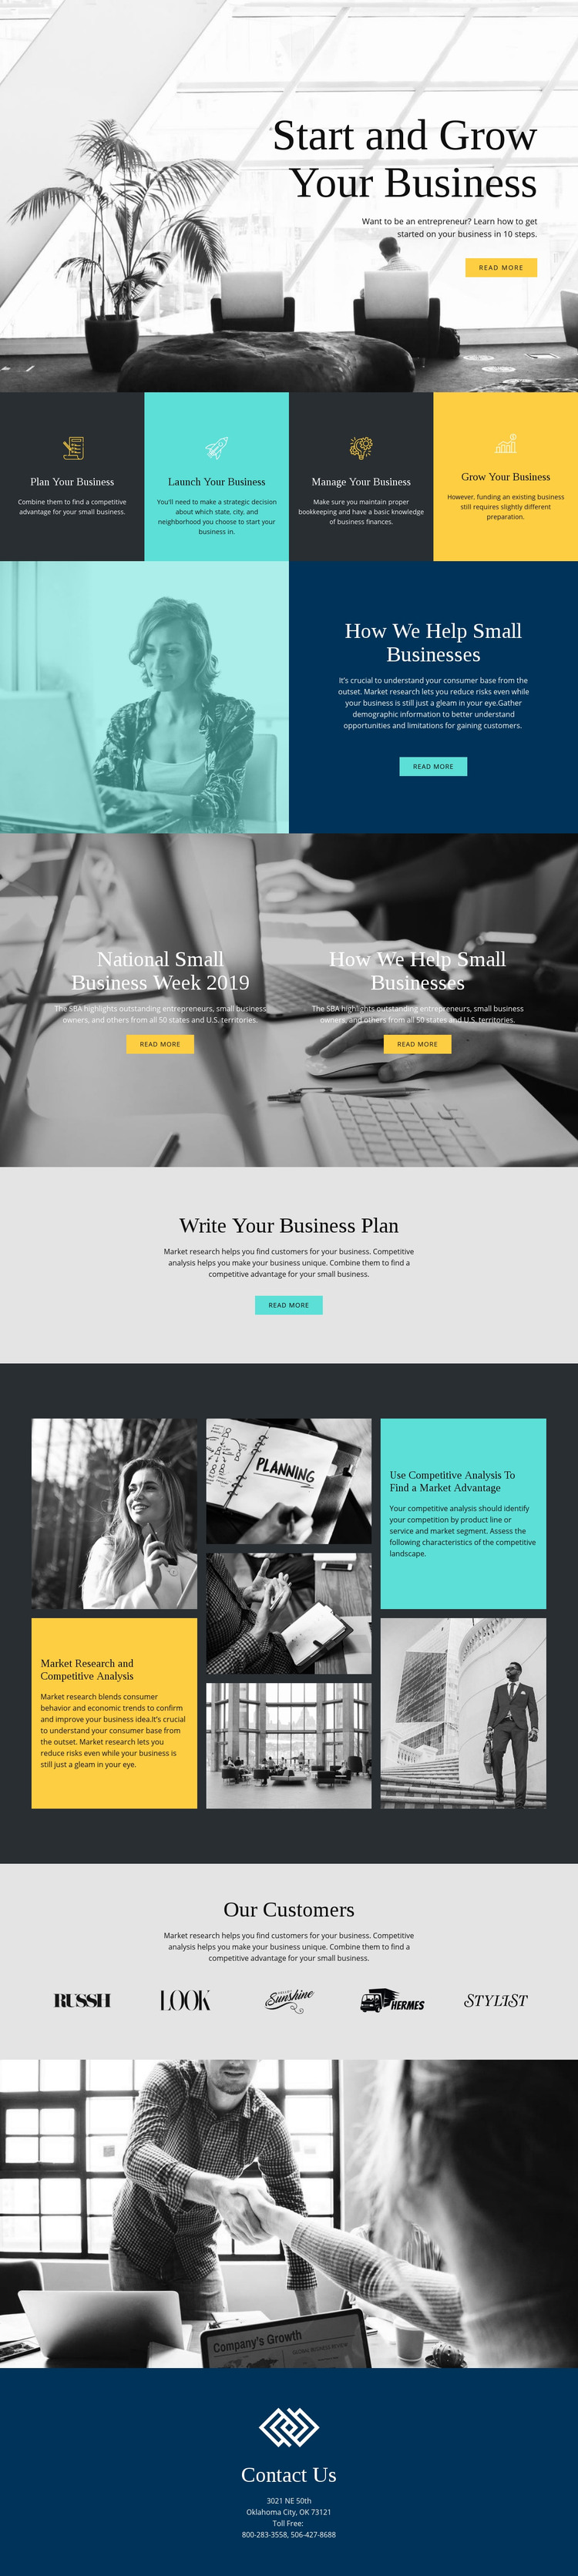 Start and grow your business Homepage Design